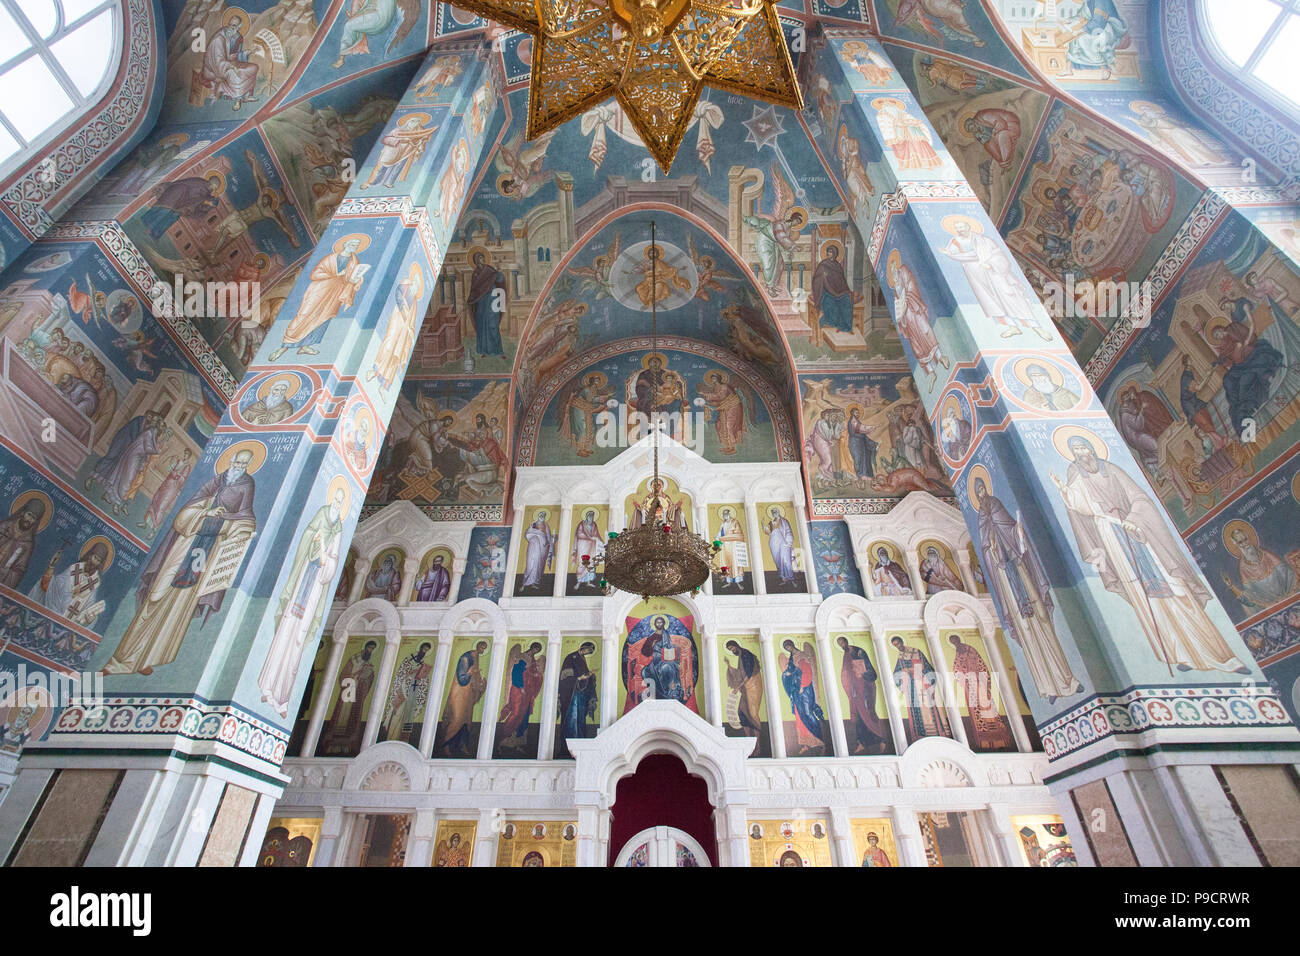 Arkhangelsk Cathedral interior, Russia Stock Photo